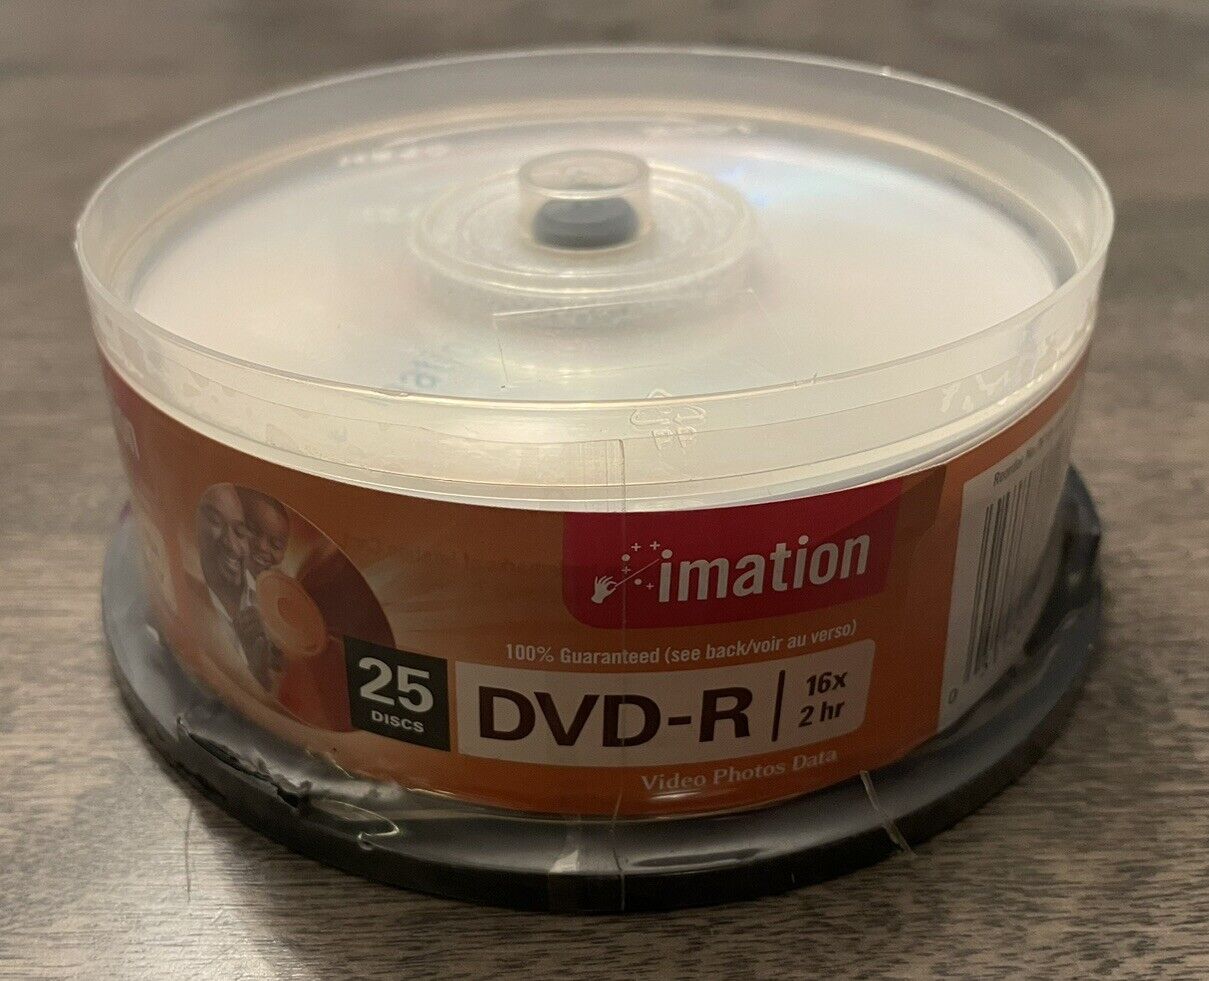 NEW Imation Recordable DVD DVD-R 25-Pack 4.7GB 16x 2 Hrs